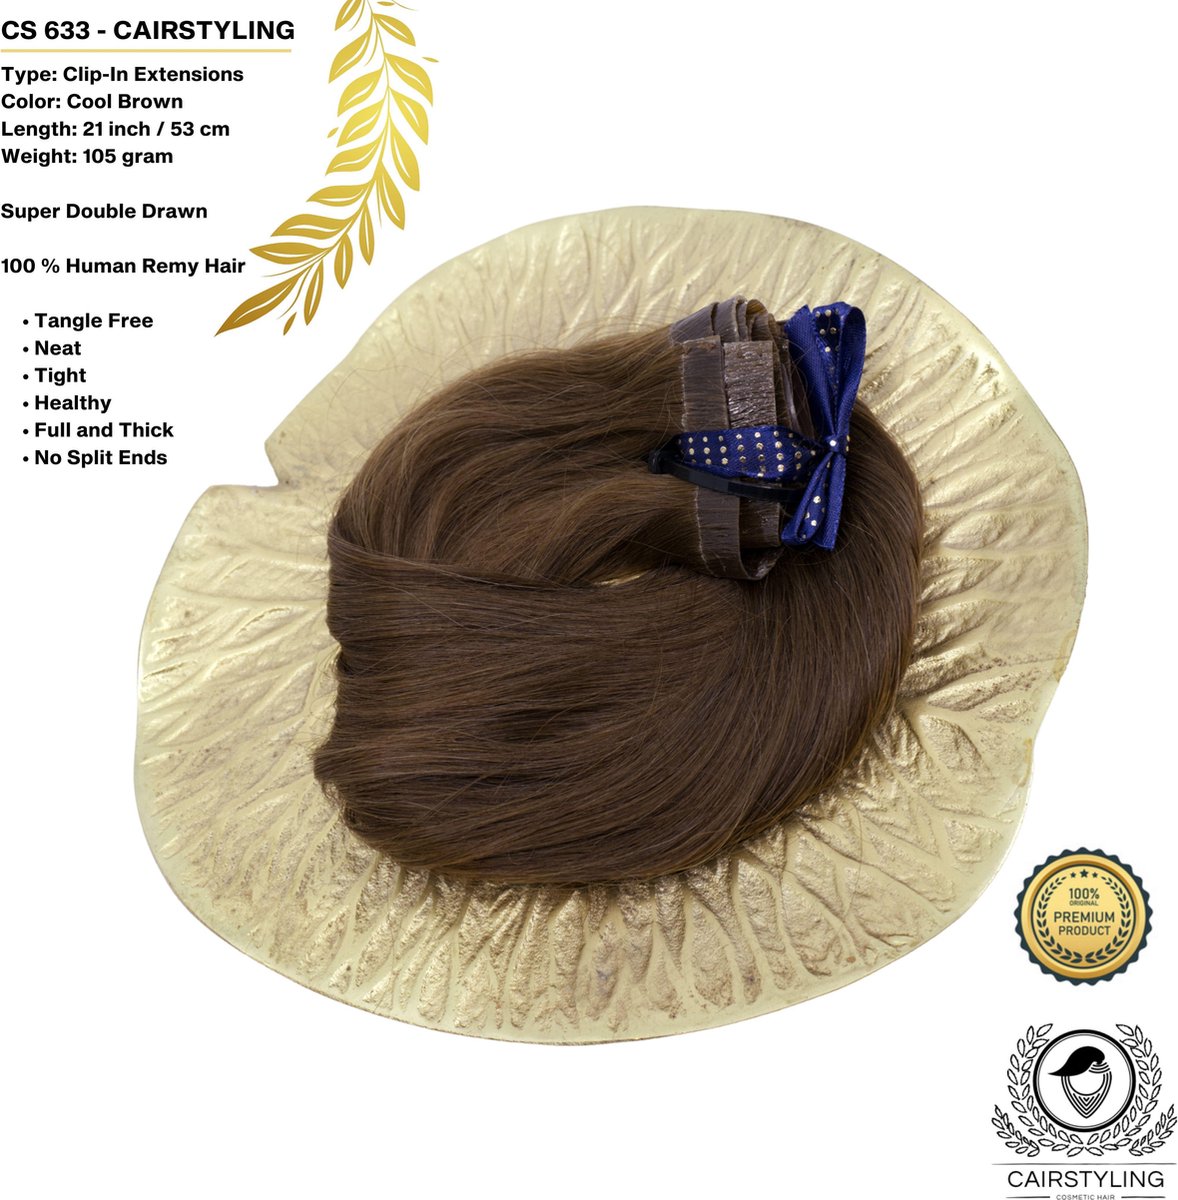 CAIRSTYLING Premium 100% Human Hair - CS633 INVISIBLE CLIP-IN - Super Double Remy Human Hair Extensions | 105 Gram | 53 CM (21 inch) | Haarverlenging | Best Quality Hair Long-term Use | 2022 Trending Seamless Invisible Laces | Cool Brown Highlights